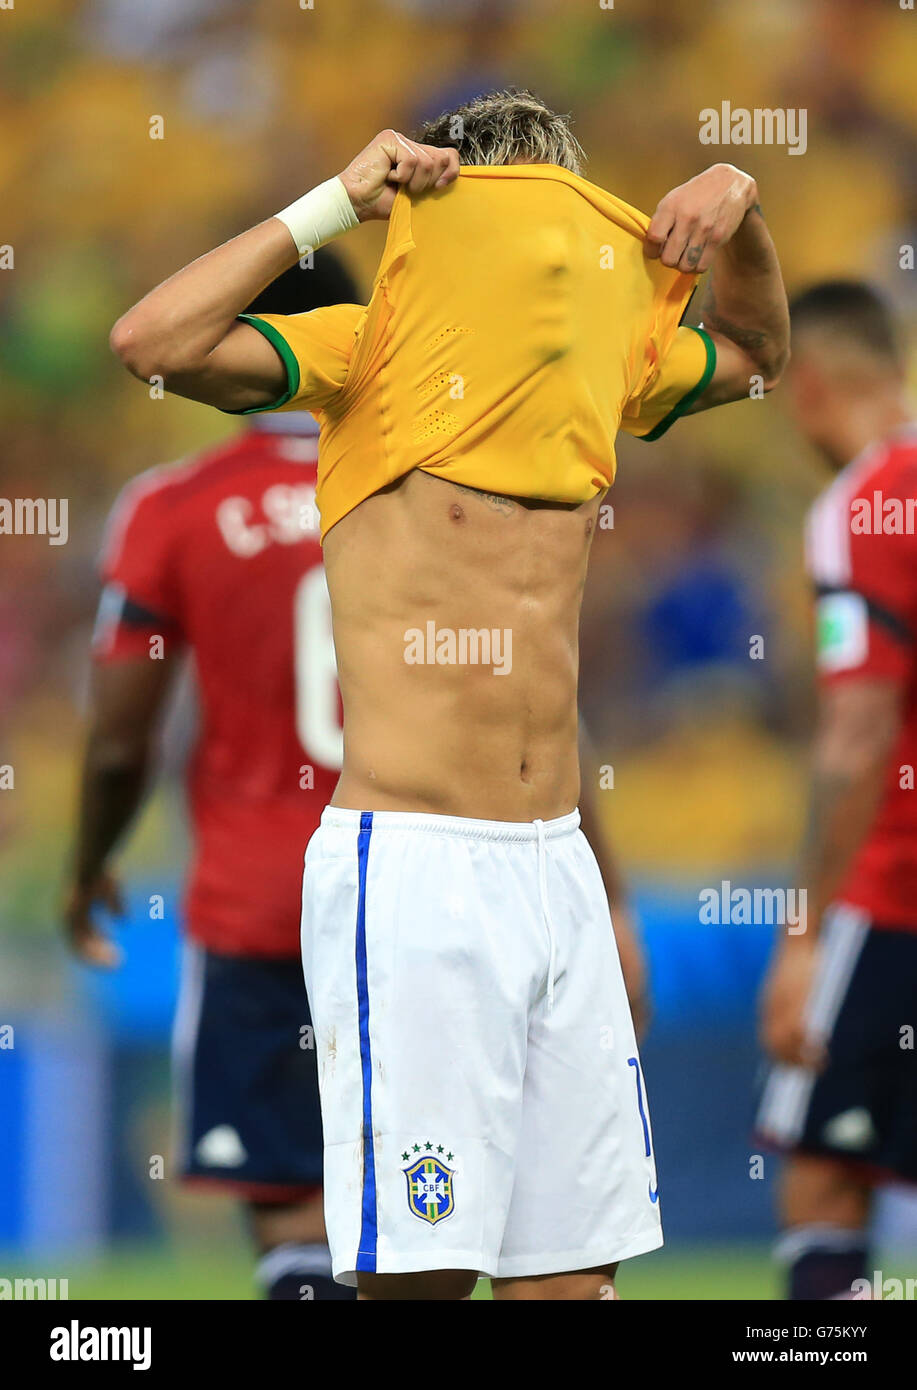 Soccer - FIFA World Cup 2014 - Quarter Final - Brazil v Colombia - Estadio Castelao. Brazil's Neymar pulls his shirt over his face after a missed chance during the quarter final match at the Estadio Castelao, Fortaleza. Stock Photo